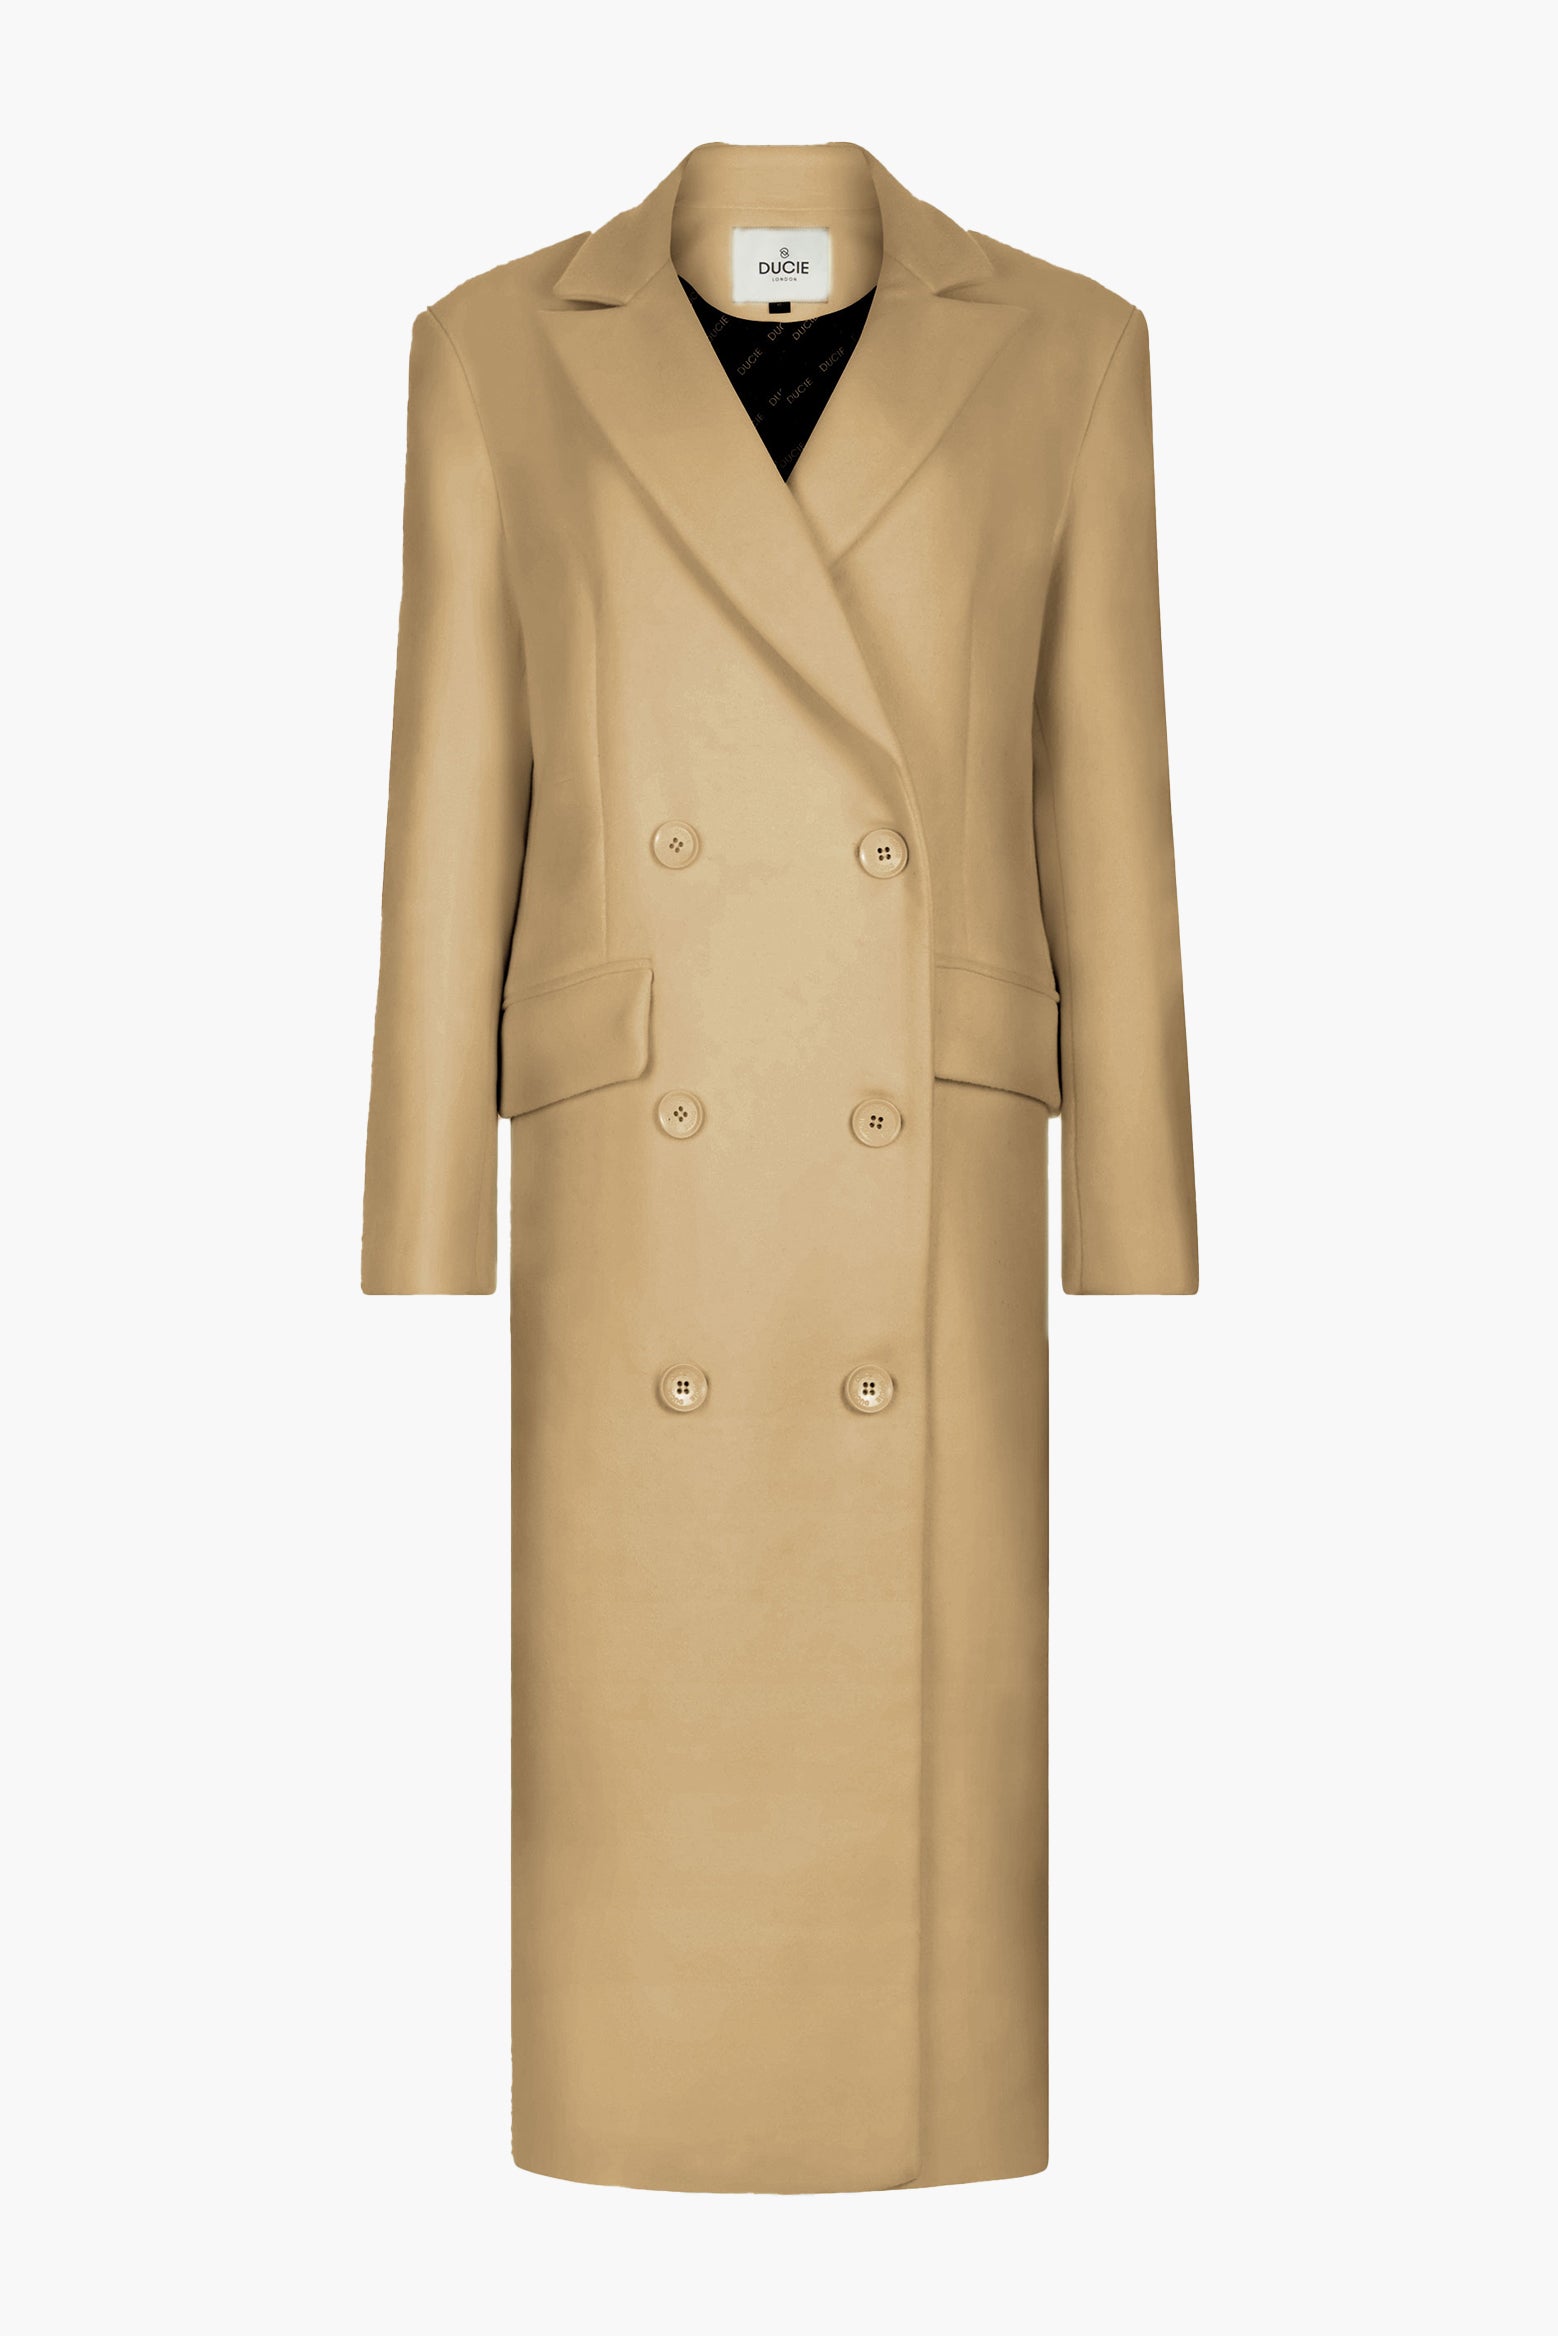 DUCIE LONDON Aggie Wool Coat in Beige available at The New Trend Australia